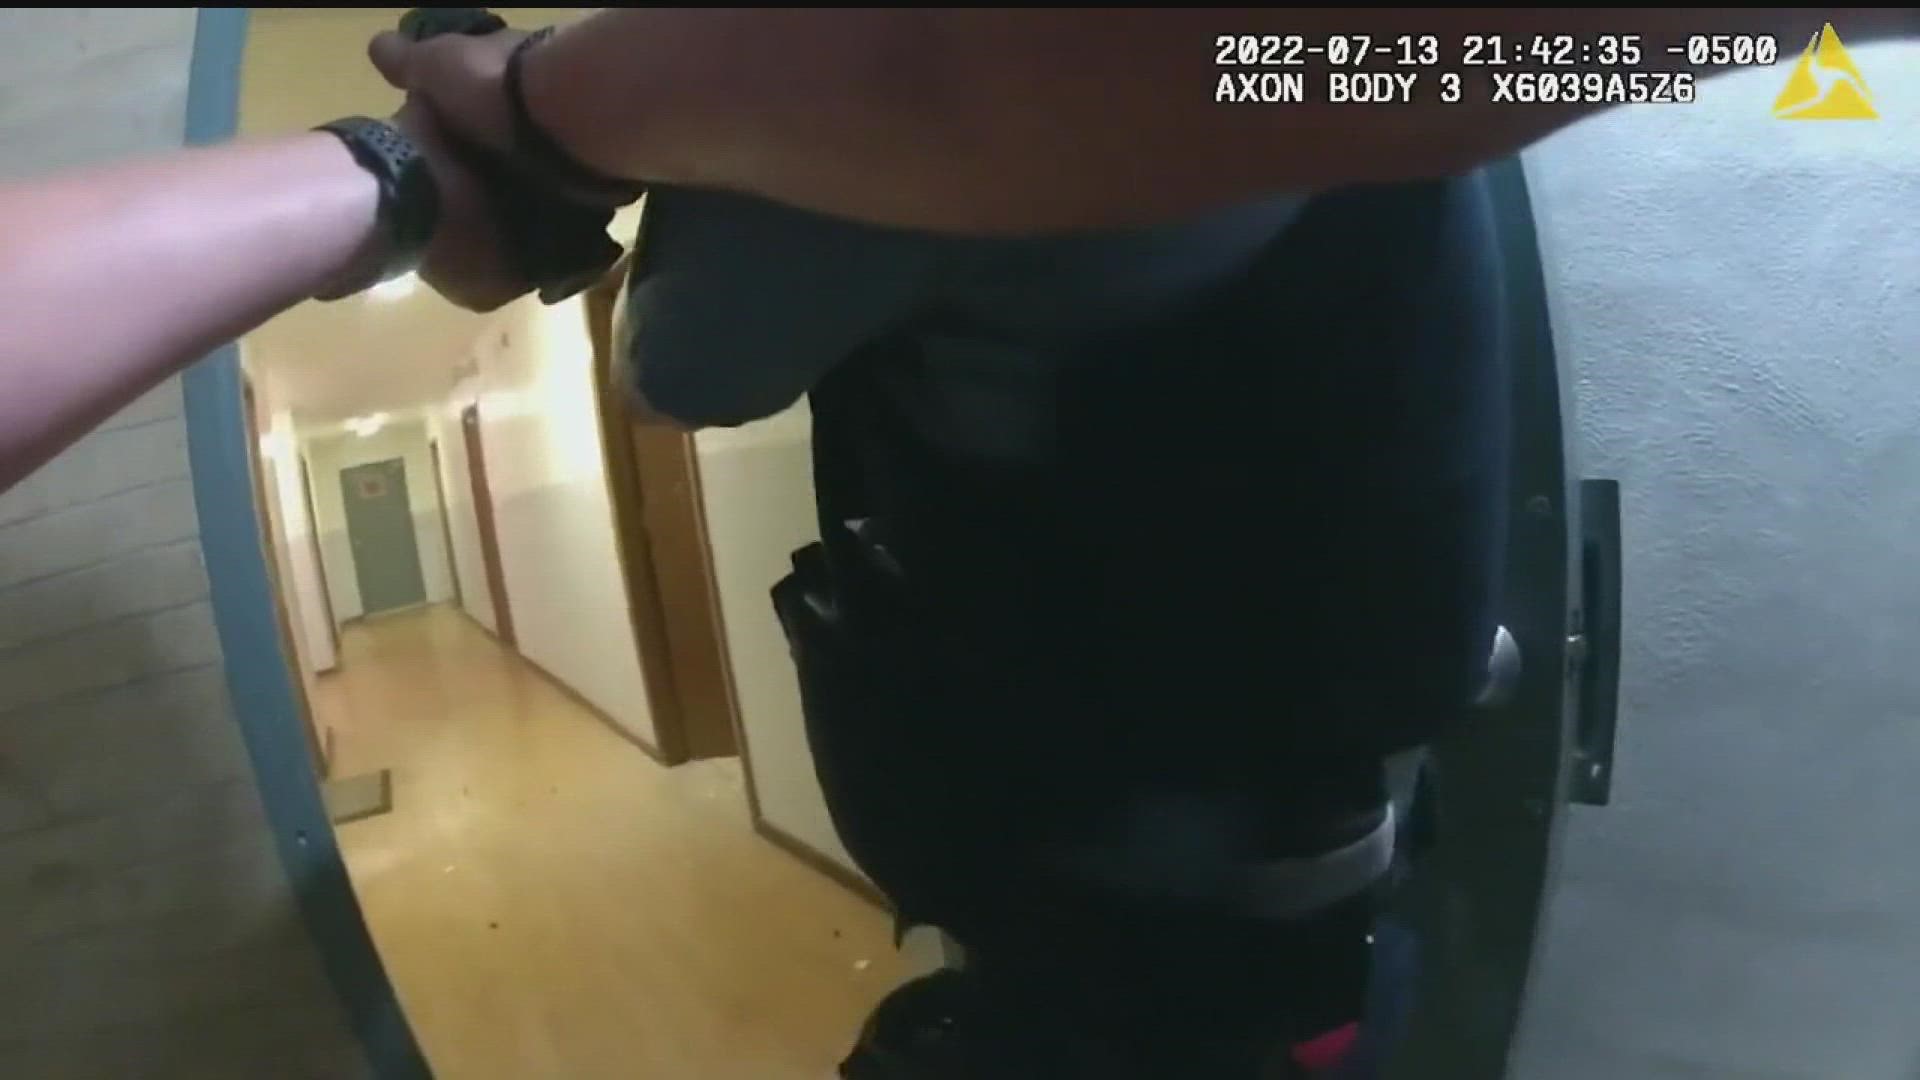 Minneapolis police released body camera footage Wednesday from responding officers the night of Tekle Sundberg's fatal shooting.